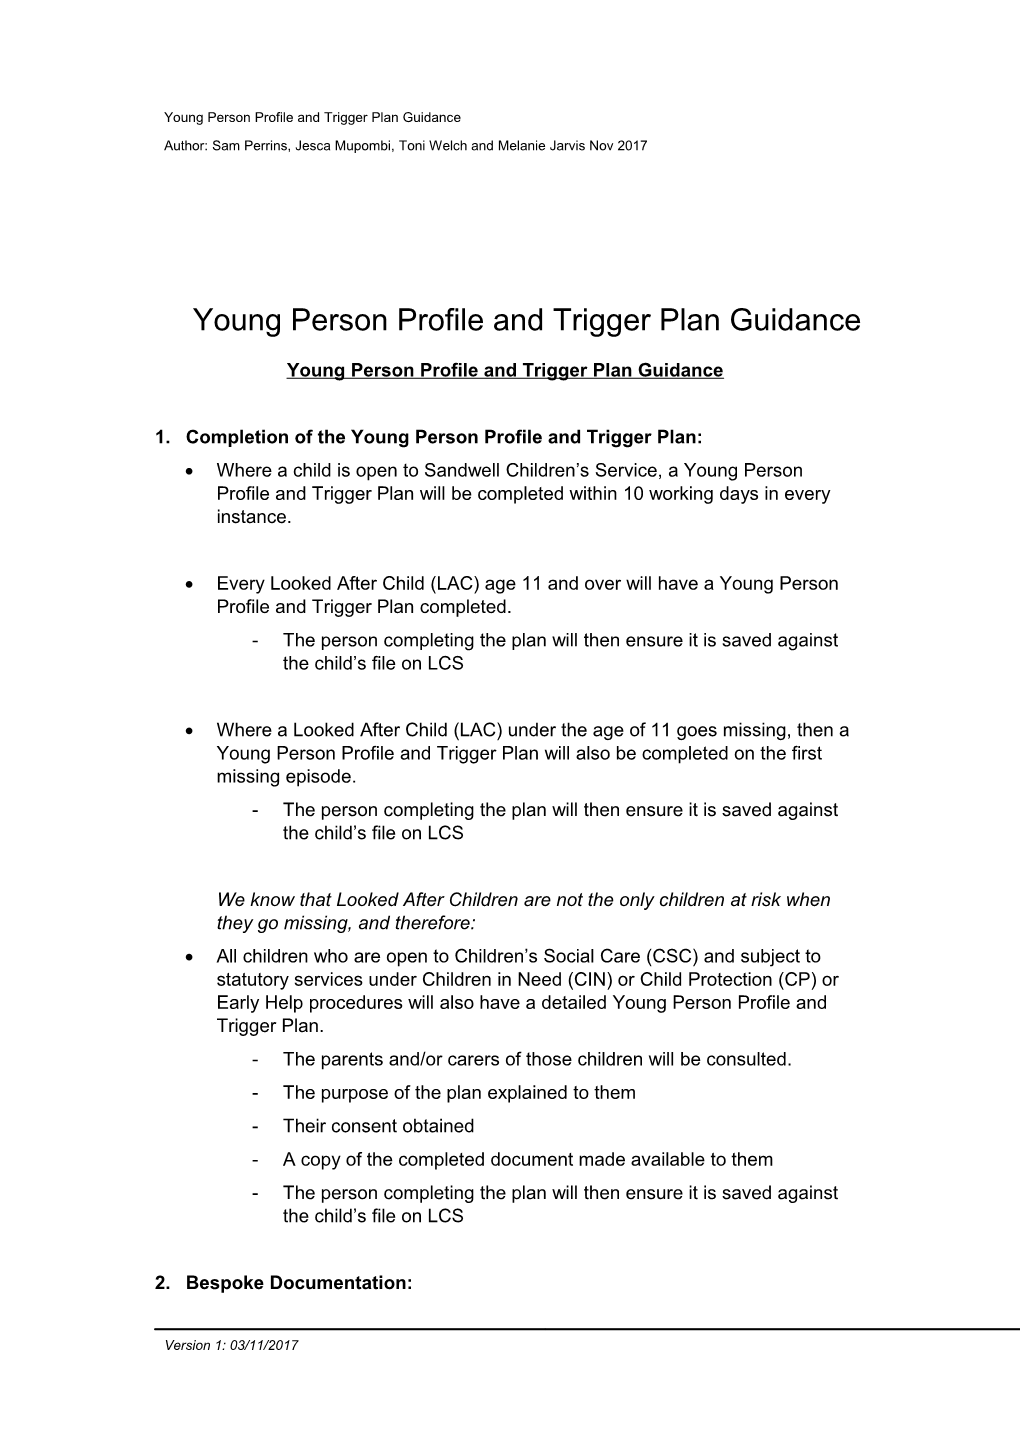 Young Person Profile and Trigger Plan Guidance